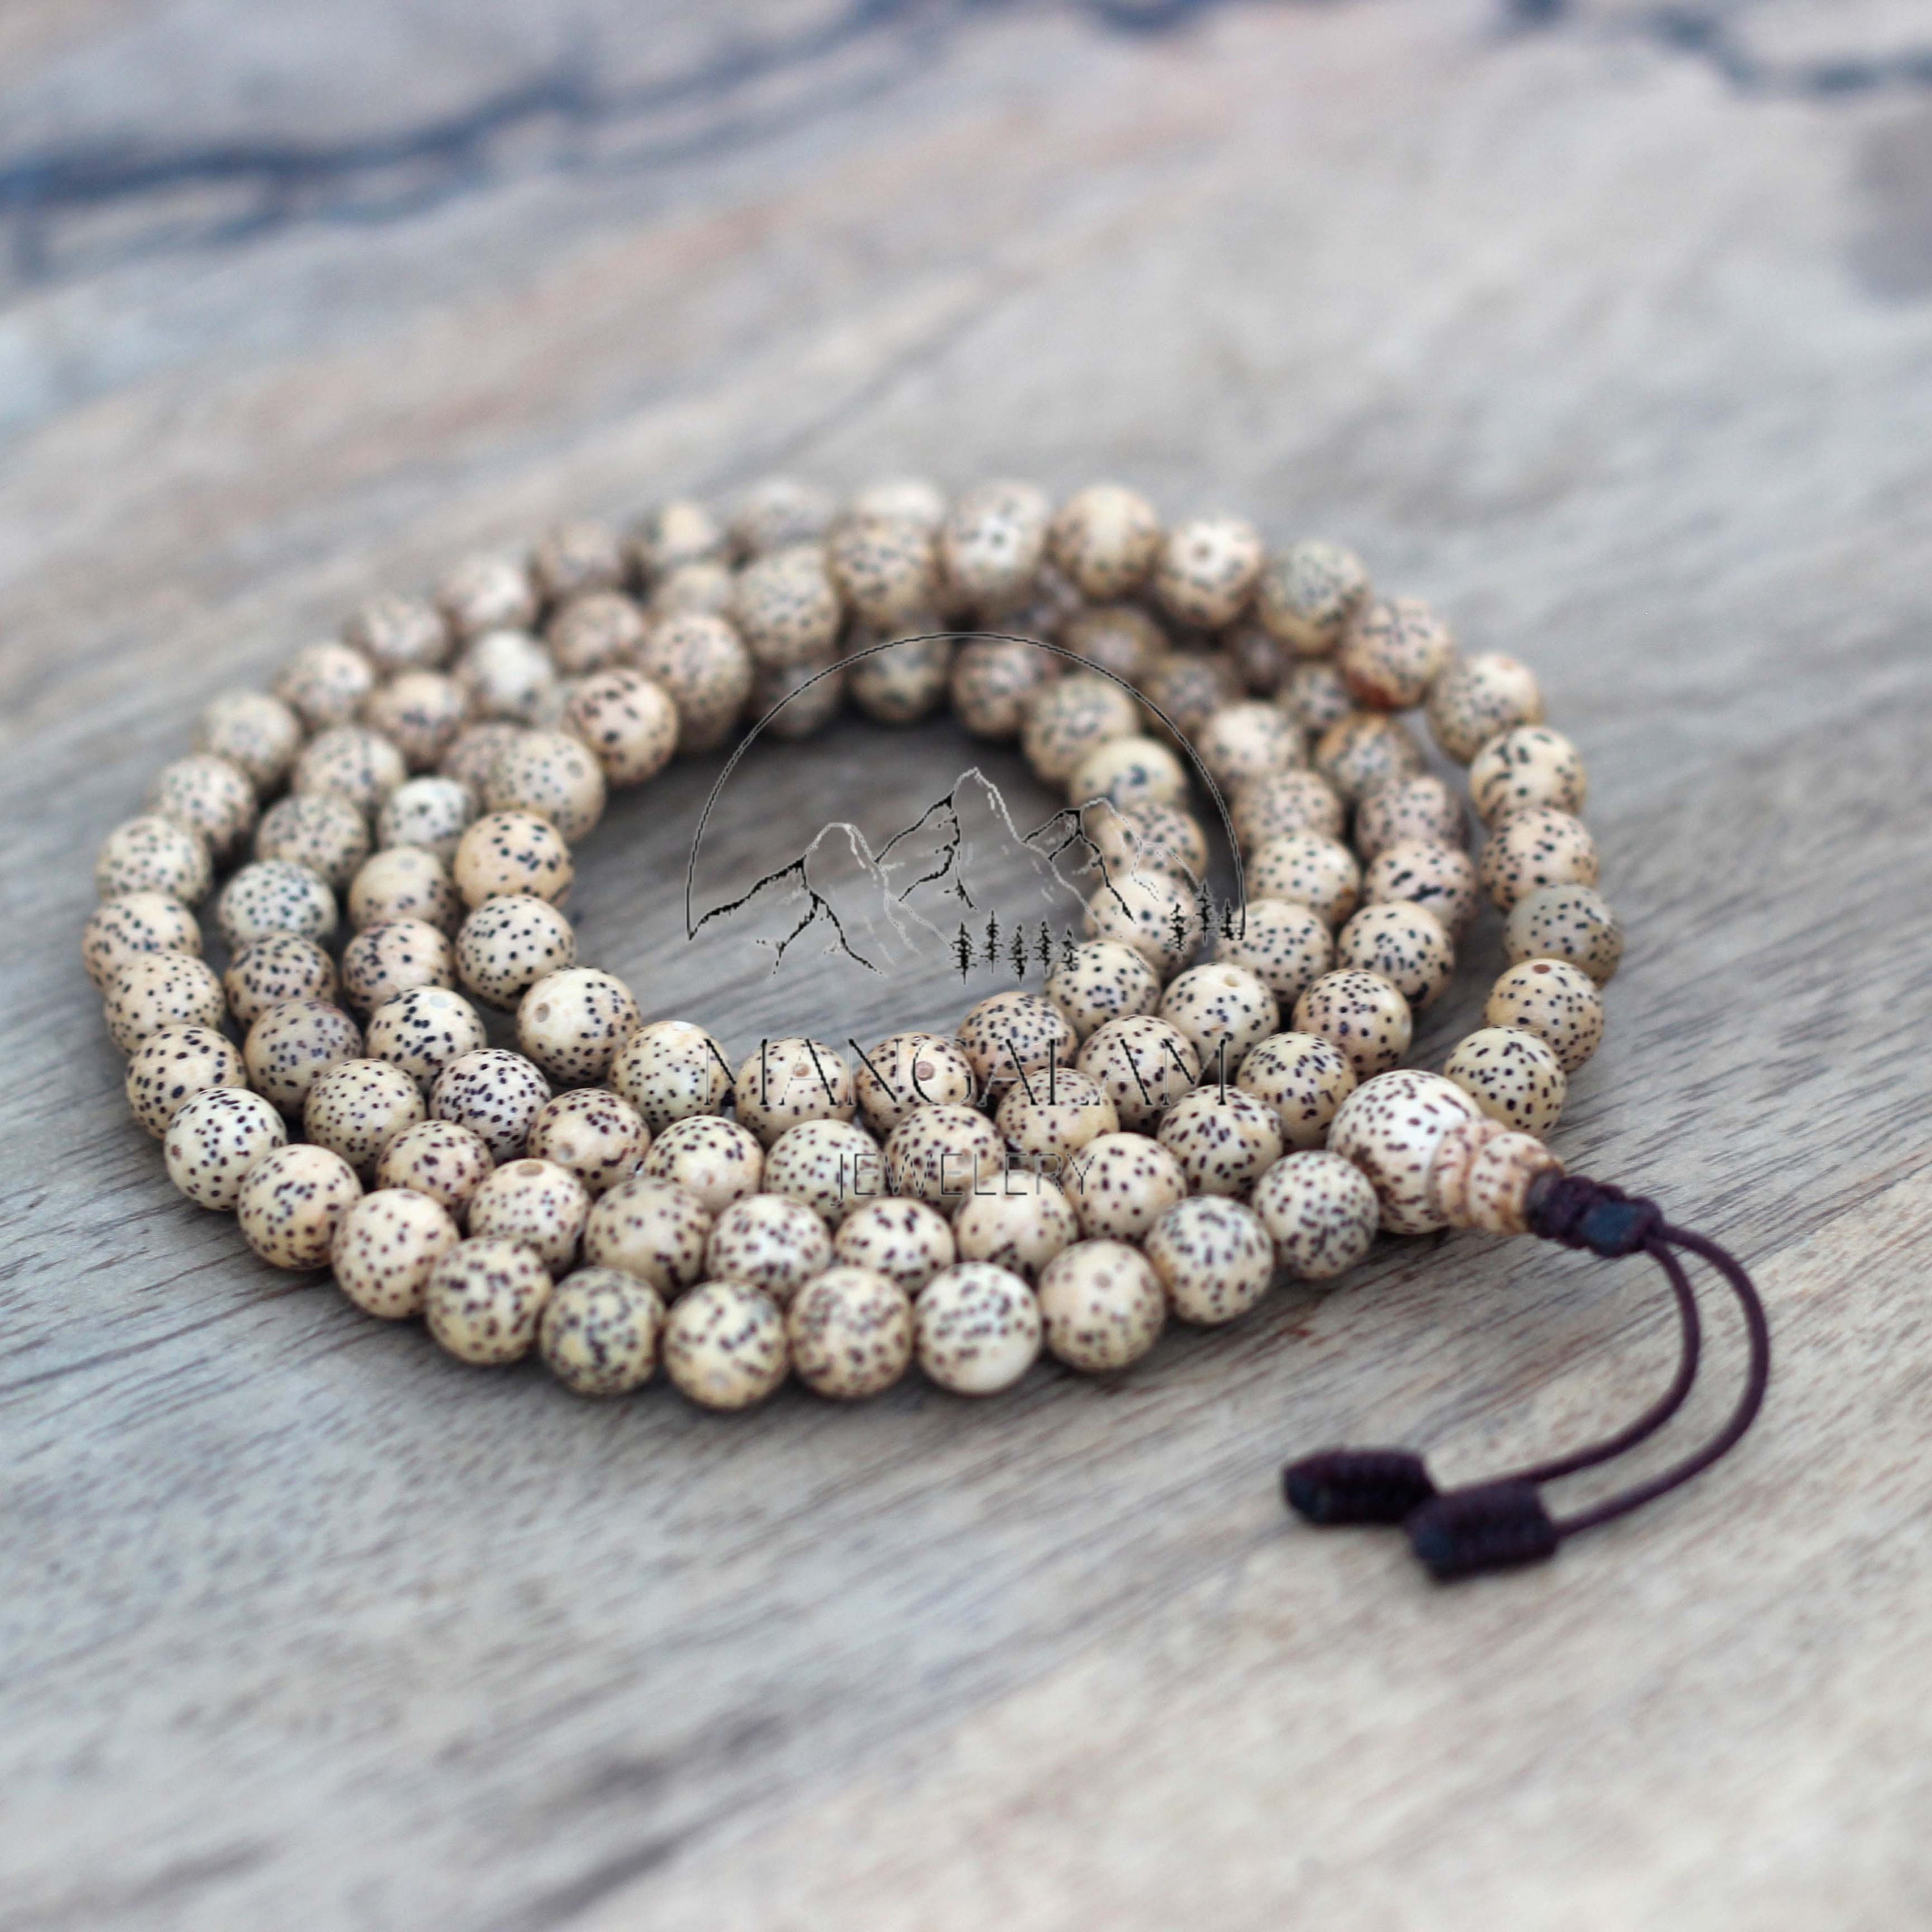 Calm Understanding Tiger Eye and Skull Mala Beads Necklace - DharmaShop